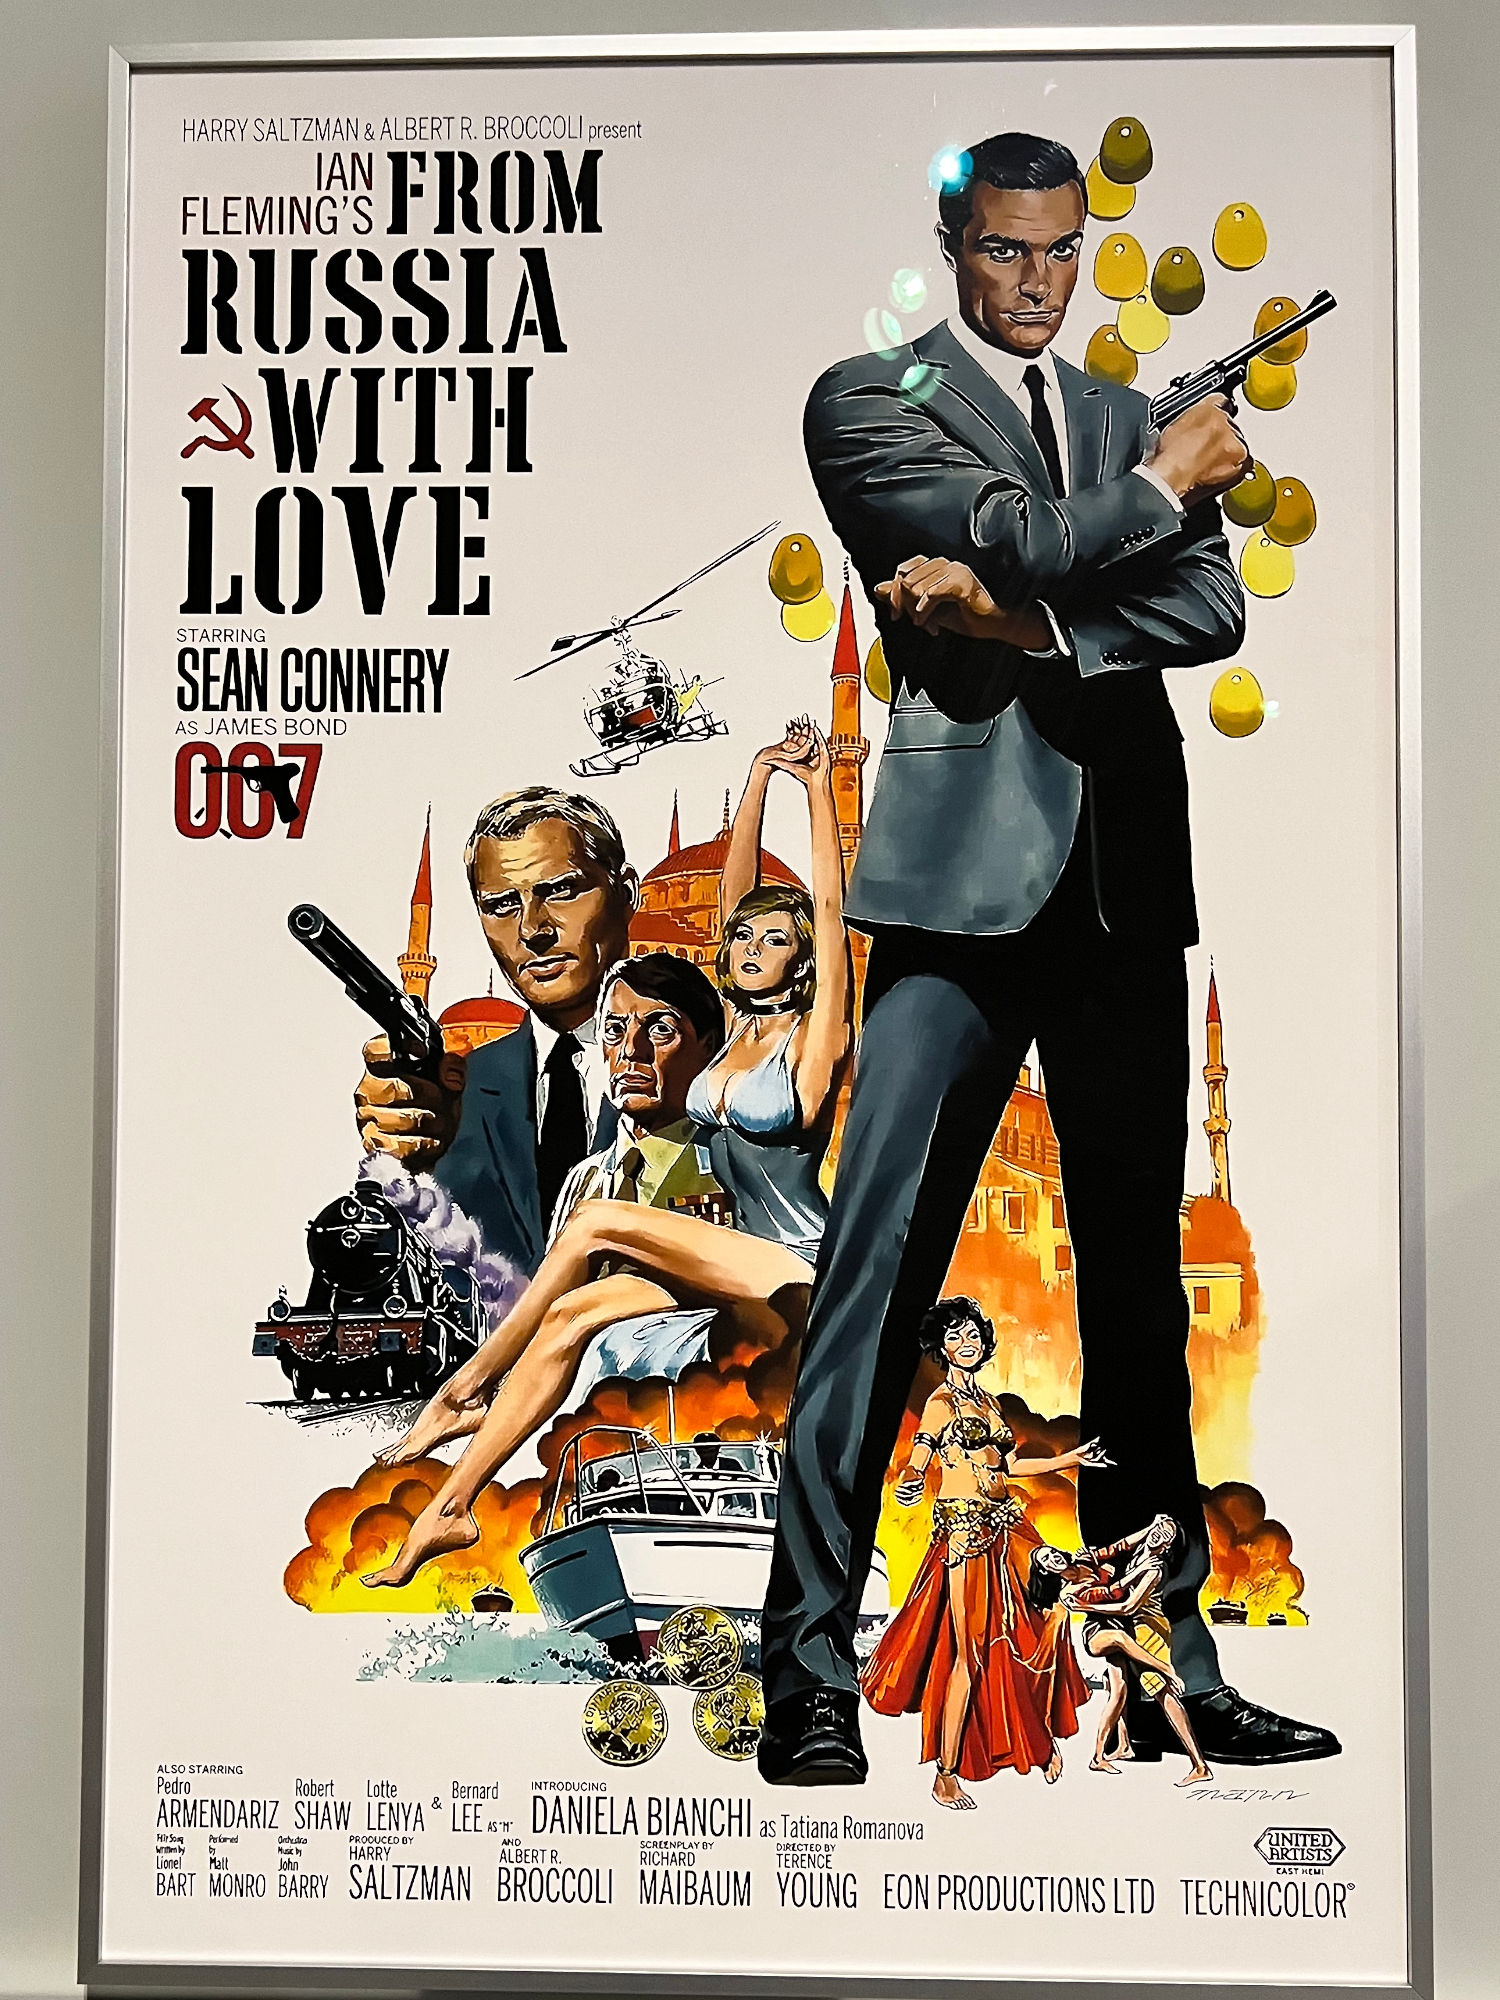 James Bond From Russia with Love